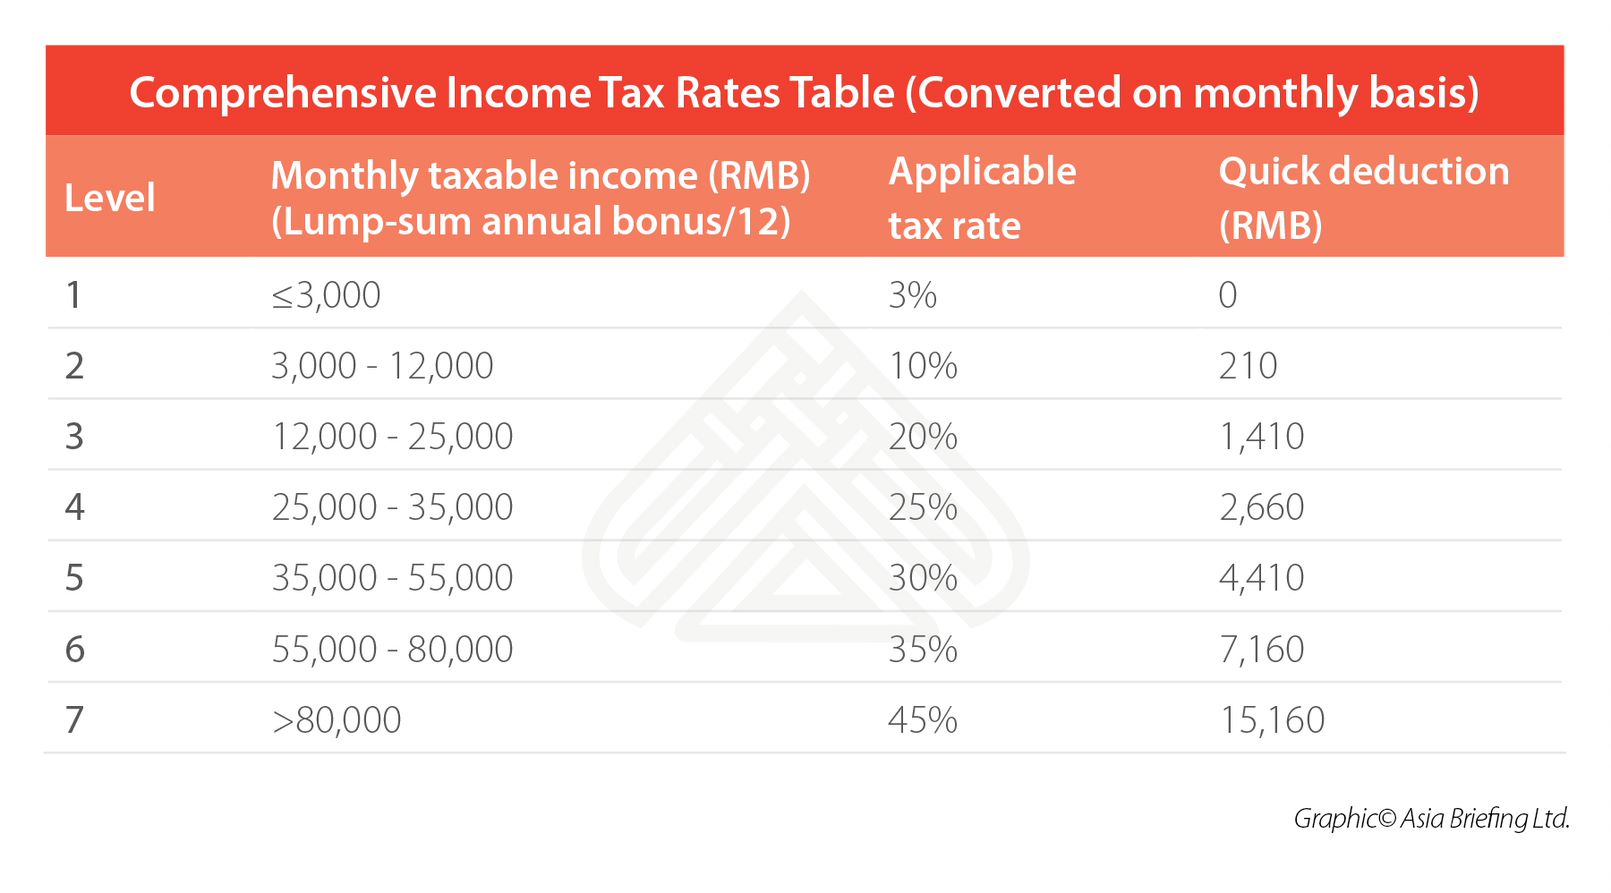 Comprehensive Income Tax Rates Table (Converted on Monthly Basis)